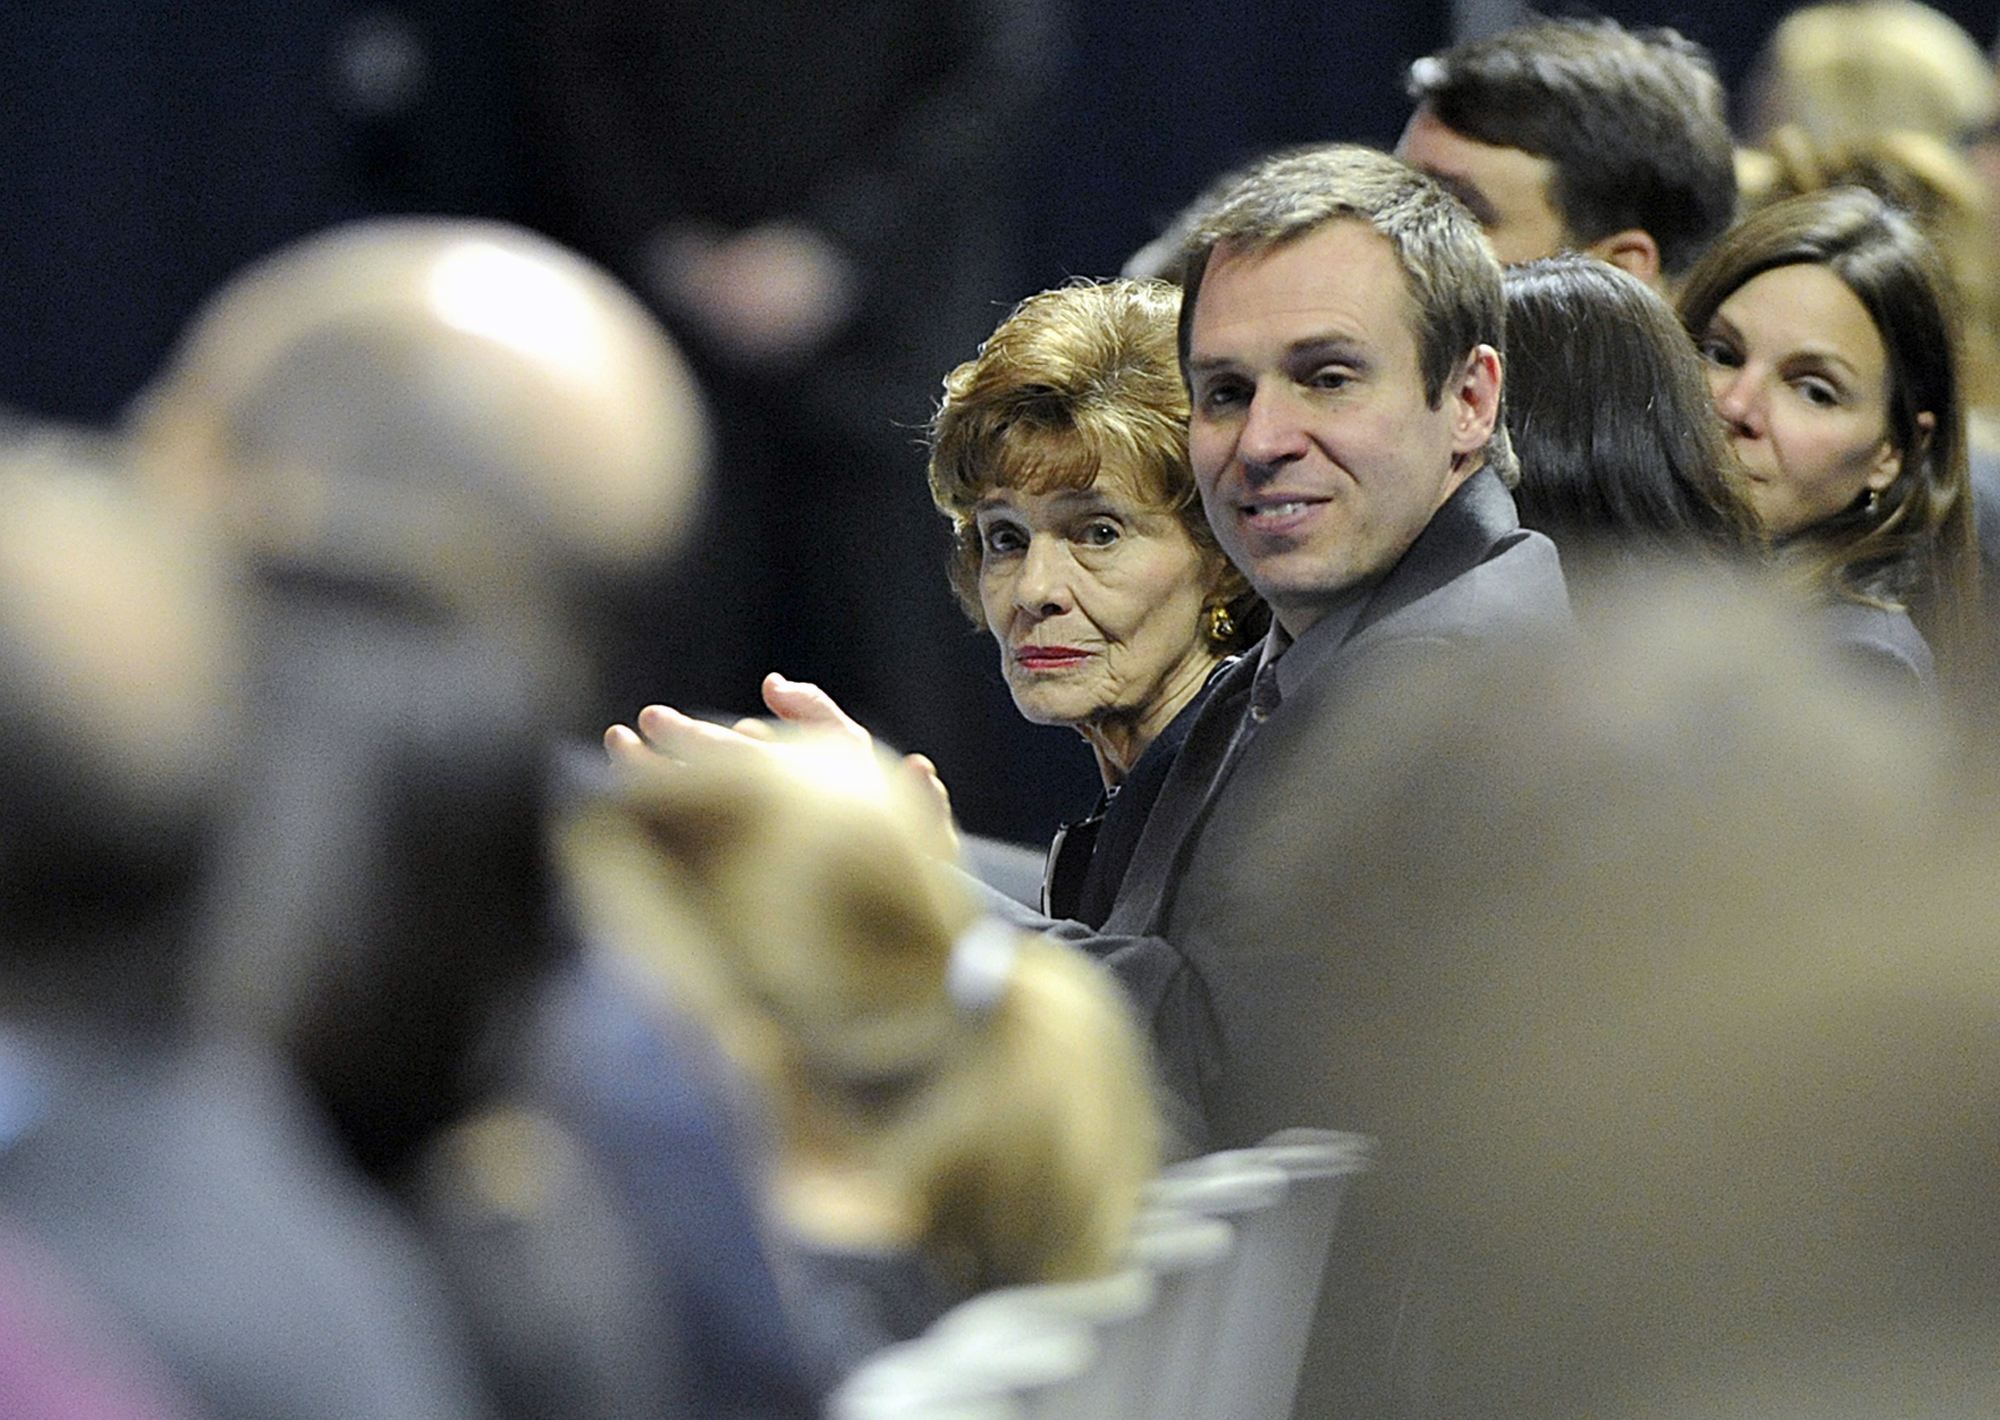  Joe Paterno's wife Sue Paterno and her son Dave sit front row at the Joe Paterno memorial on Thursday, Jan. 26, 2012 in the Bryce Jordan Center. 